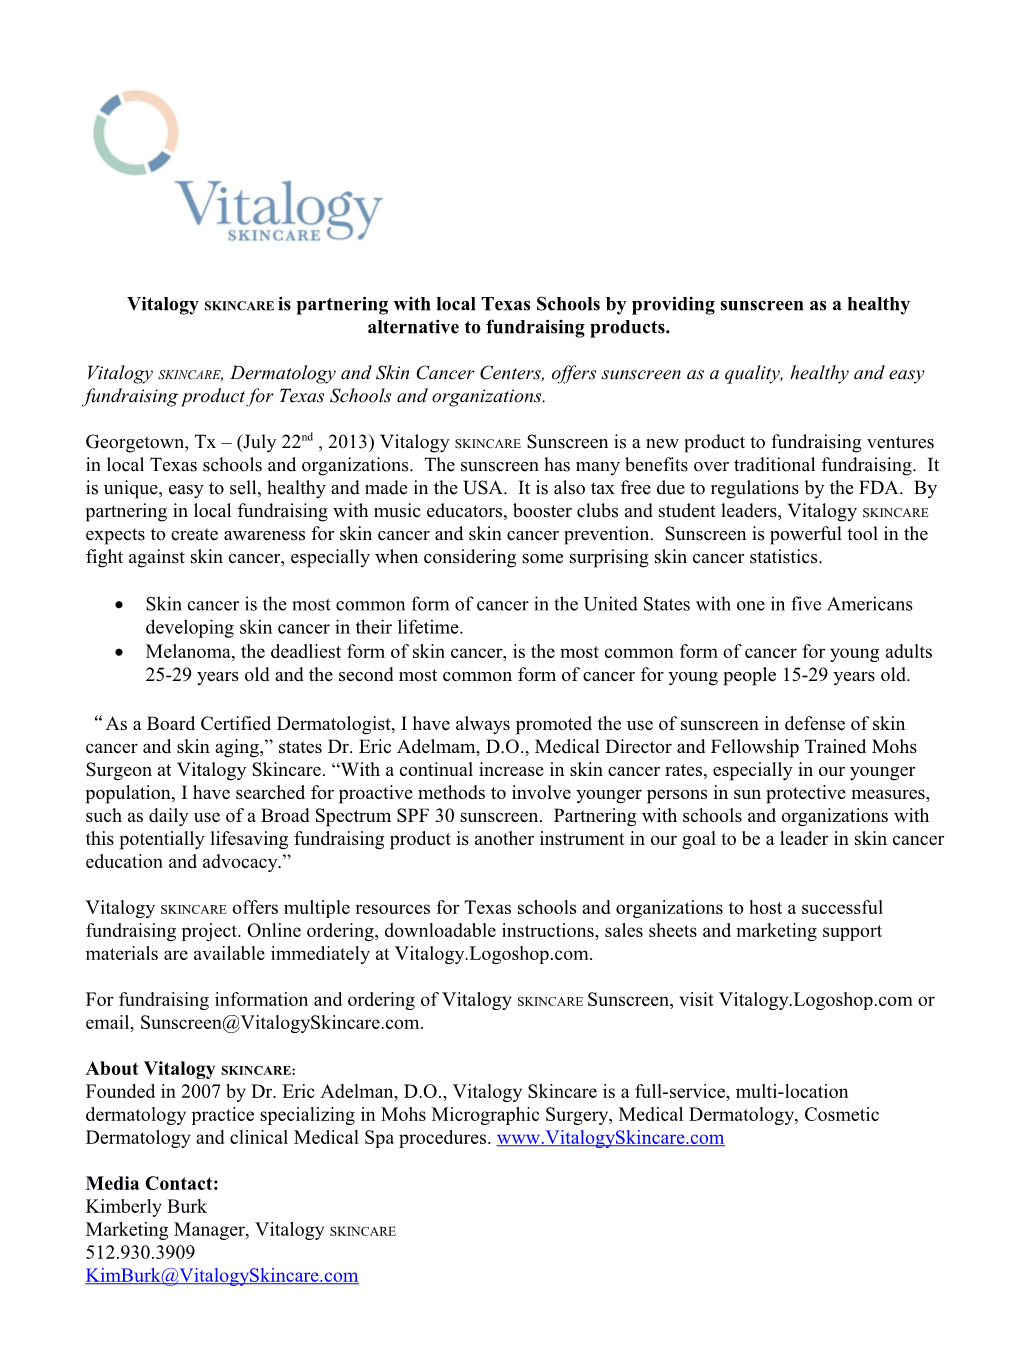 Vitalogy SKINCARE Is Partnering with Local Texas Schools by Providing Sunscreen As a Healthy